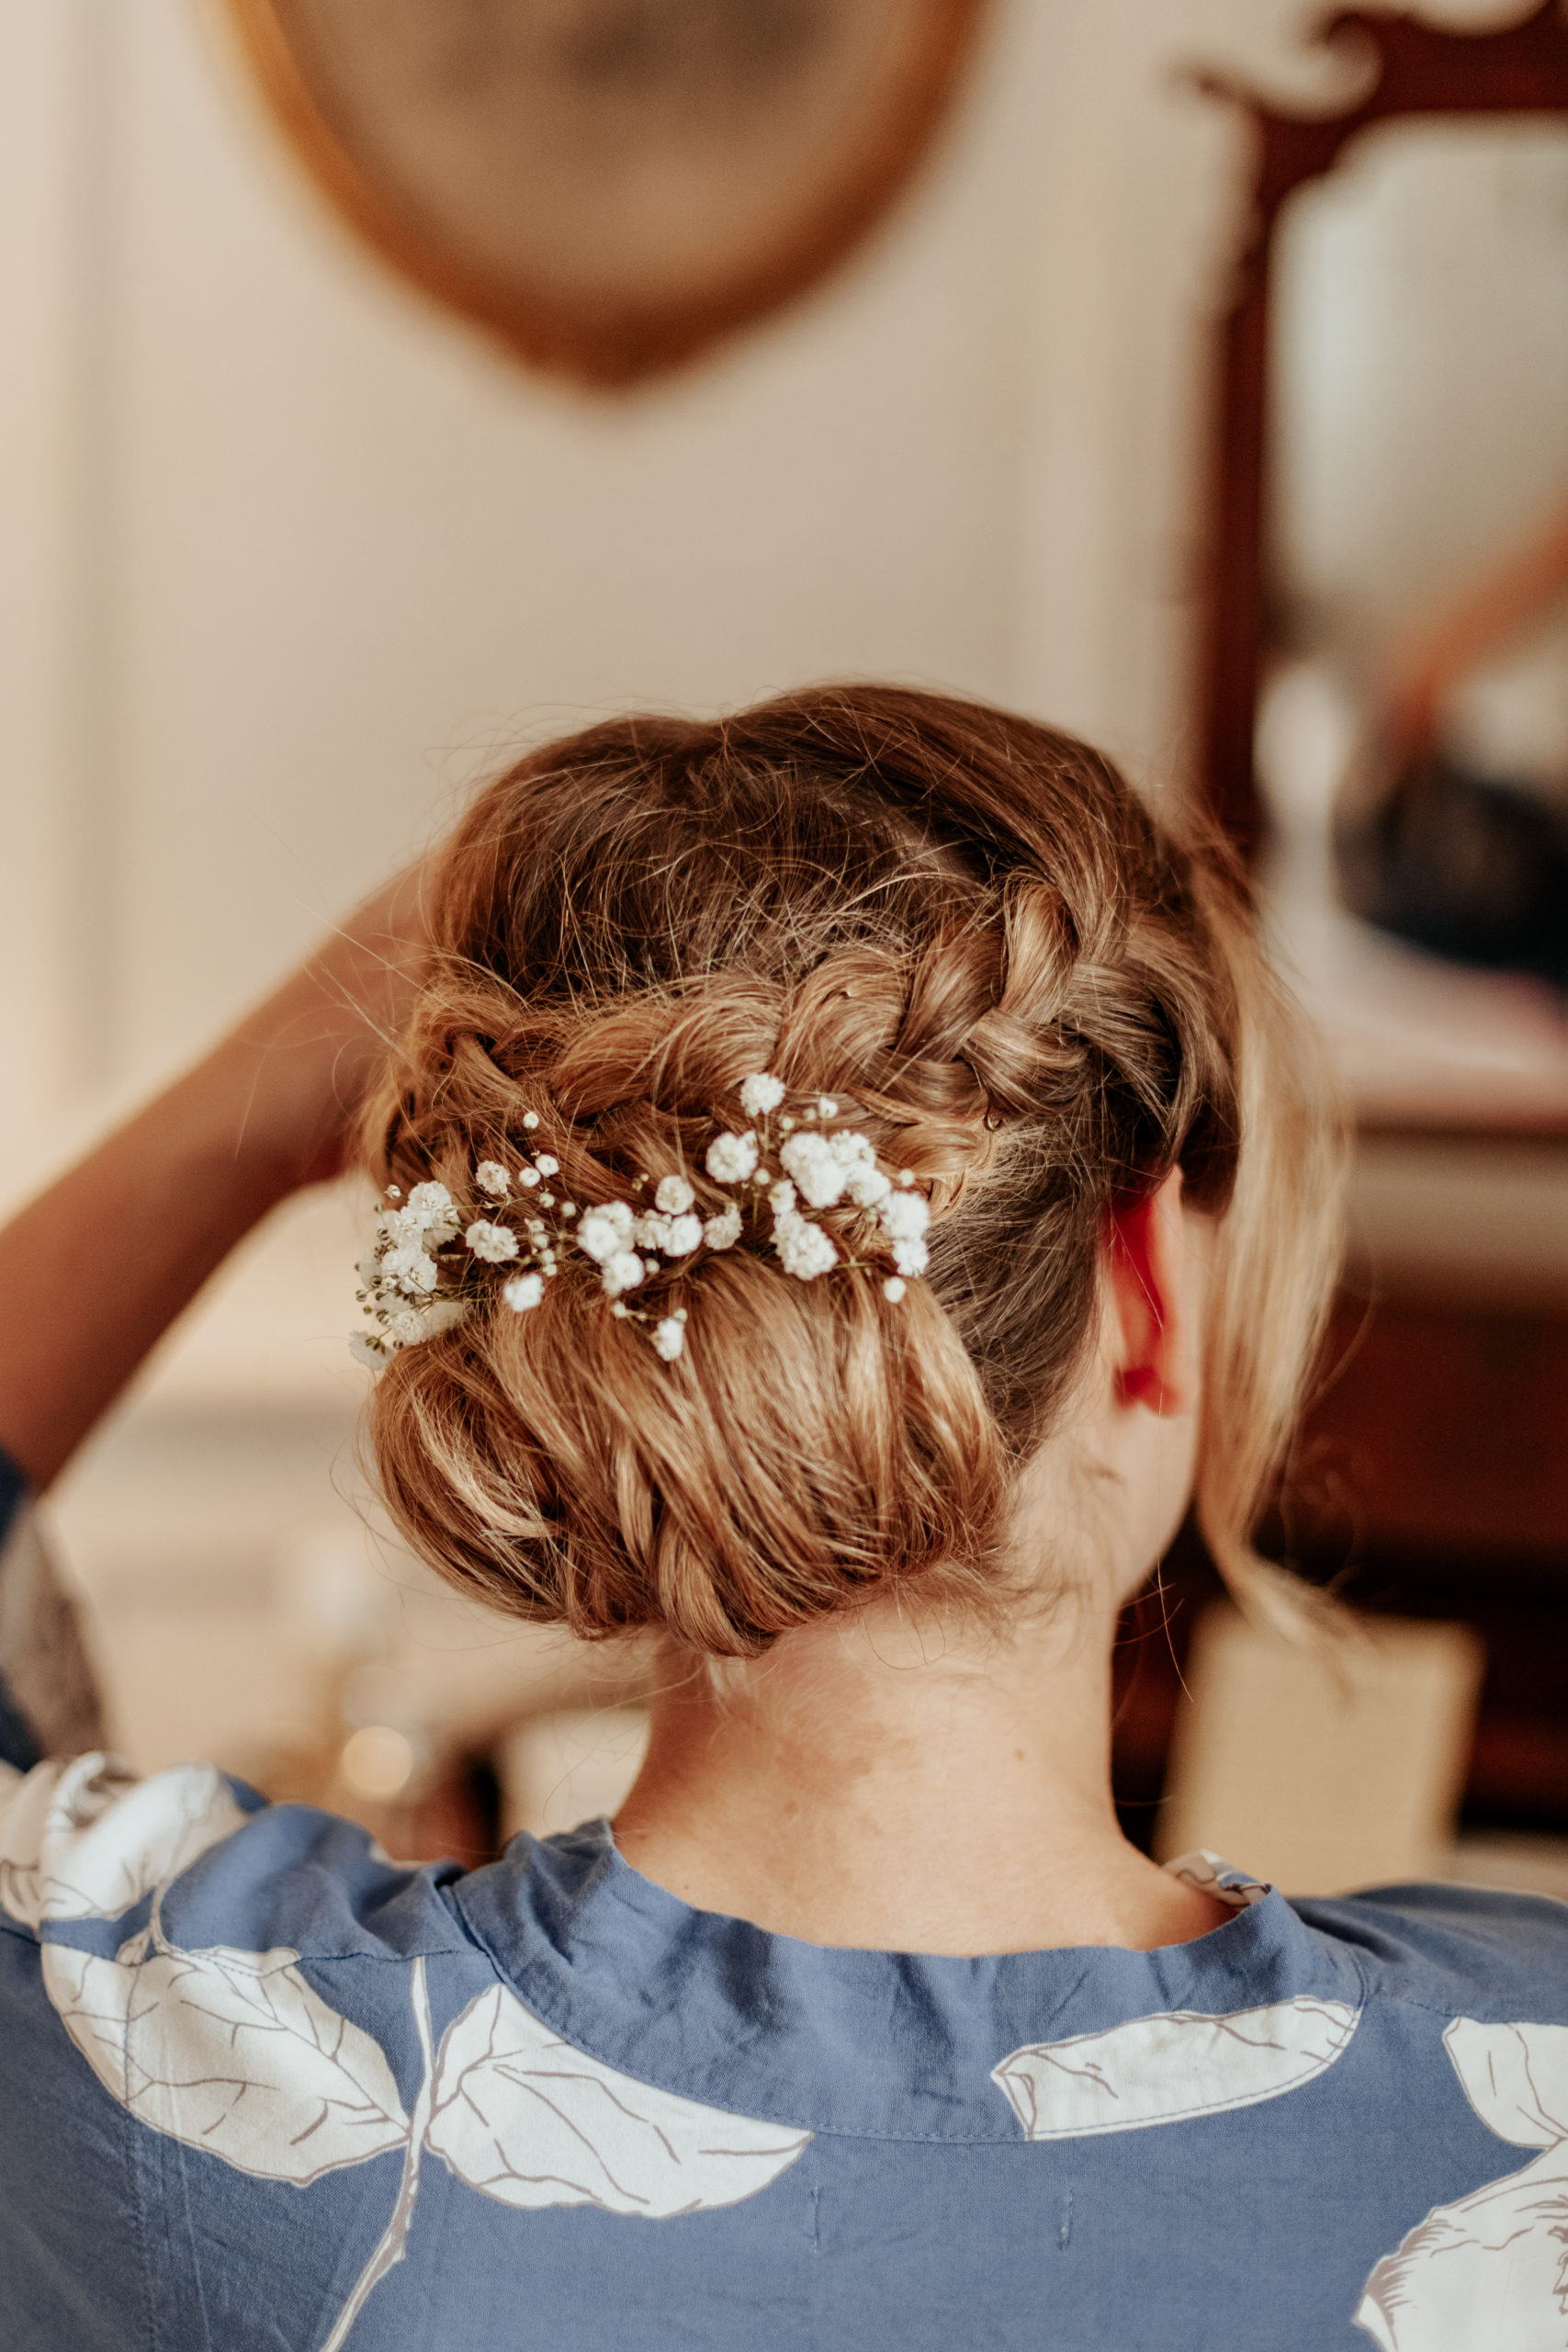 Sarah&#039;s braided bun, with flowers woven into it